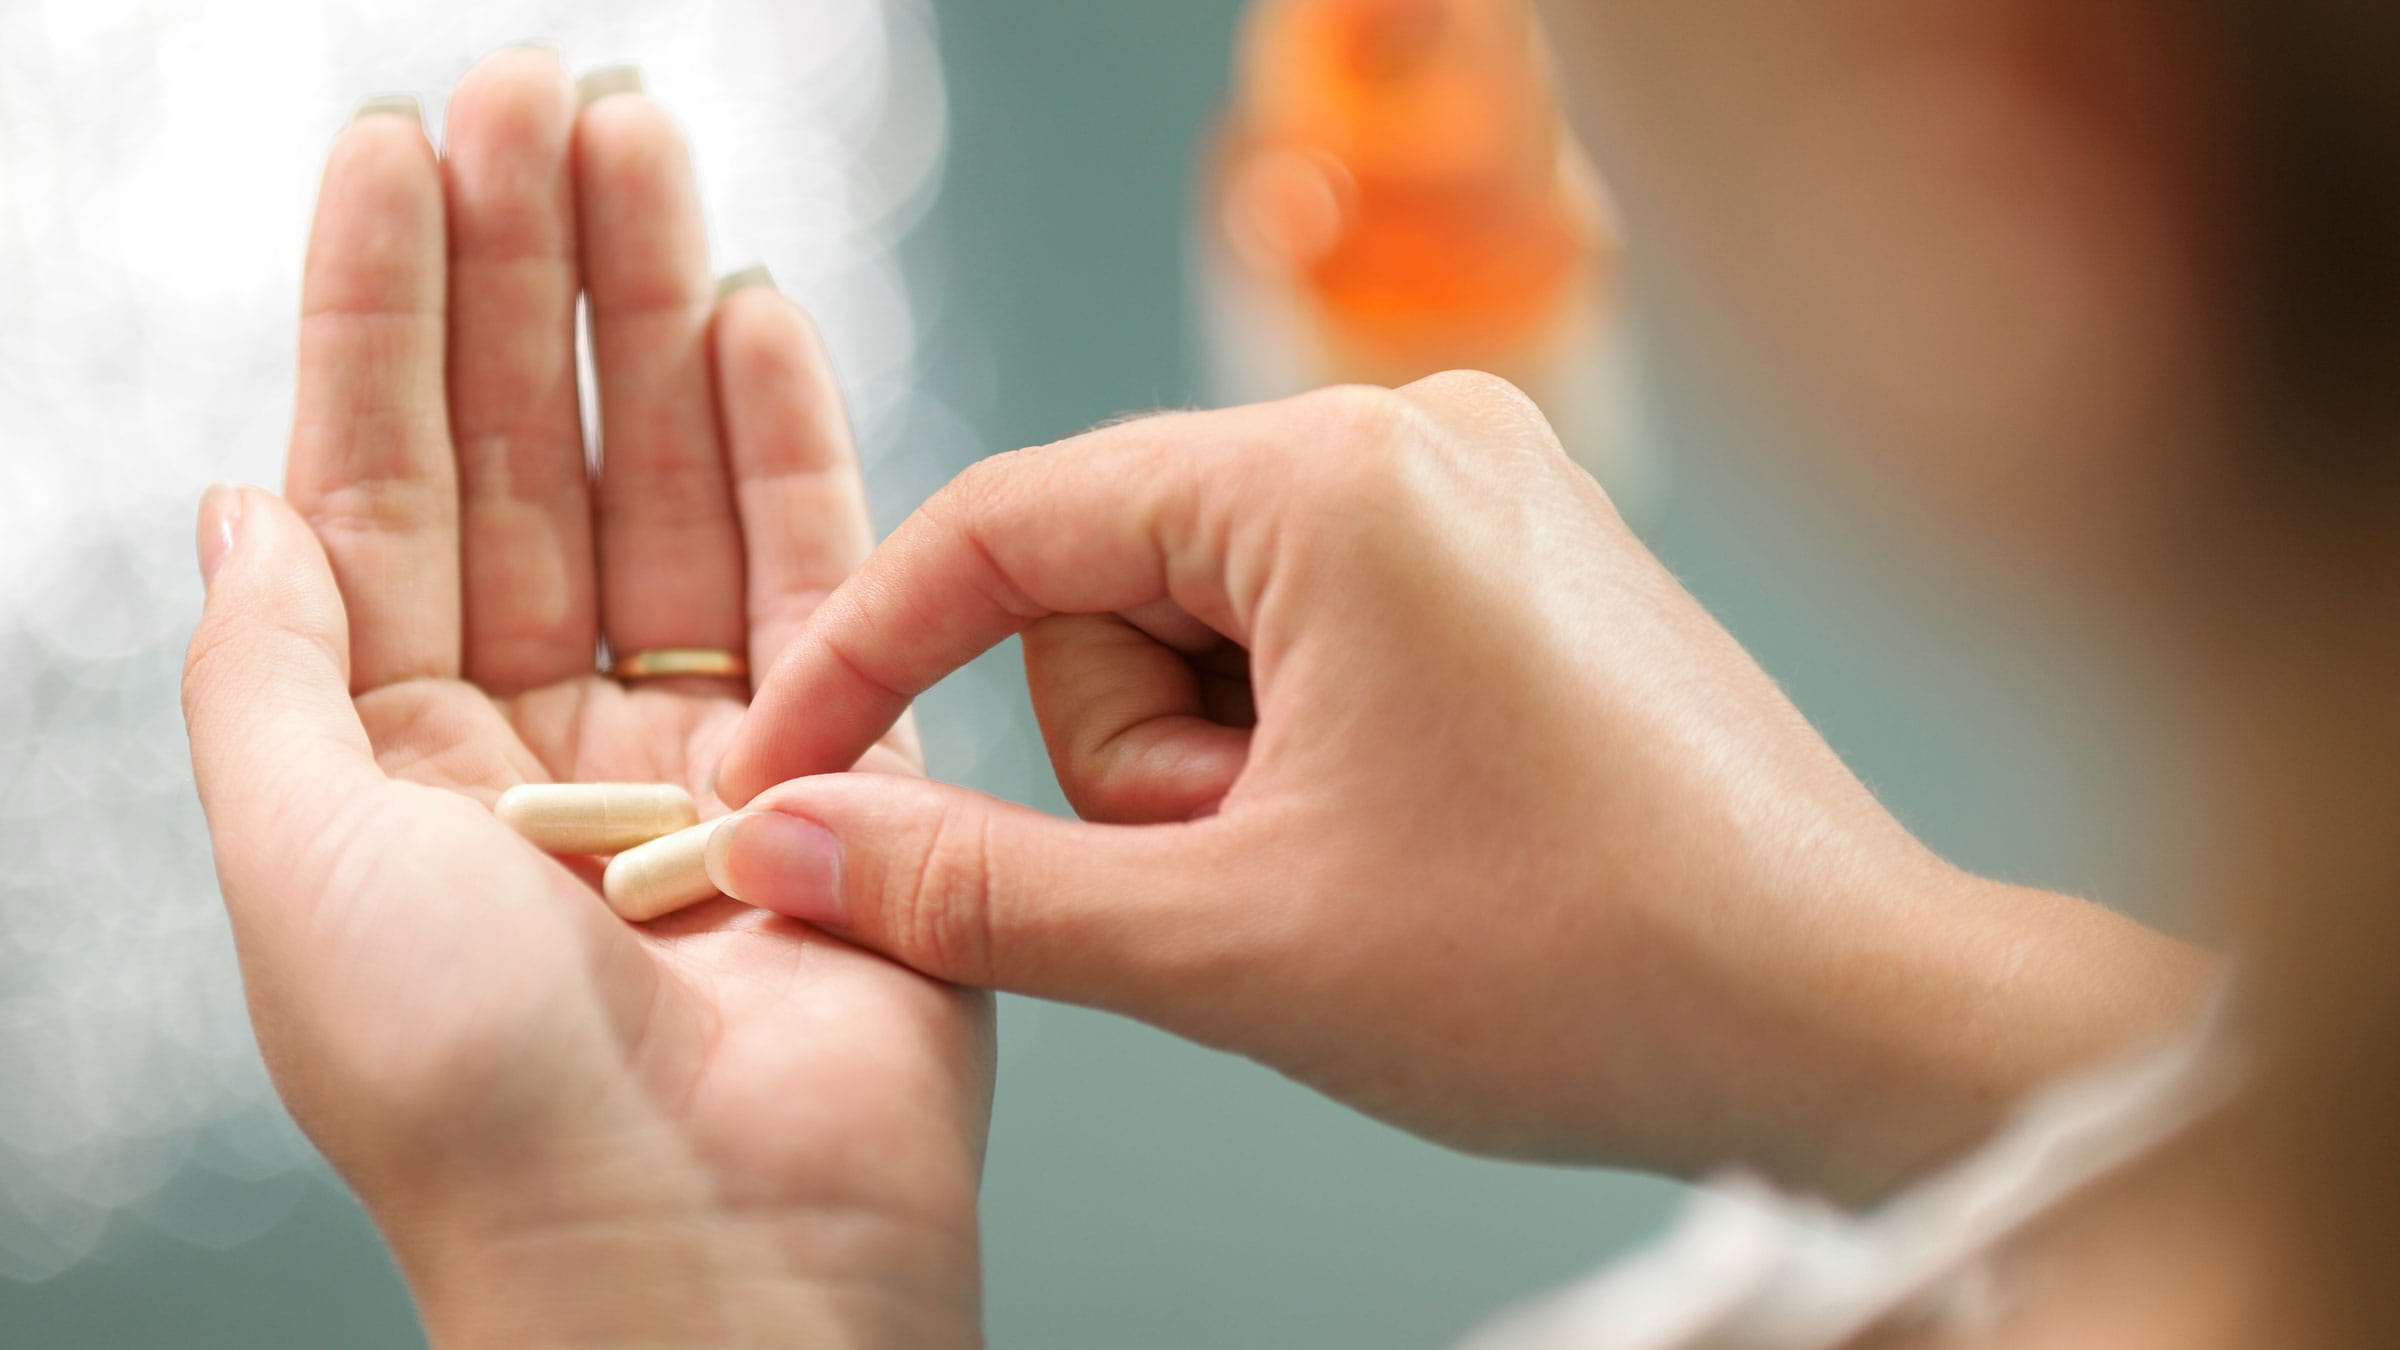 Close-up image of hands holding some supplement pills